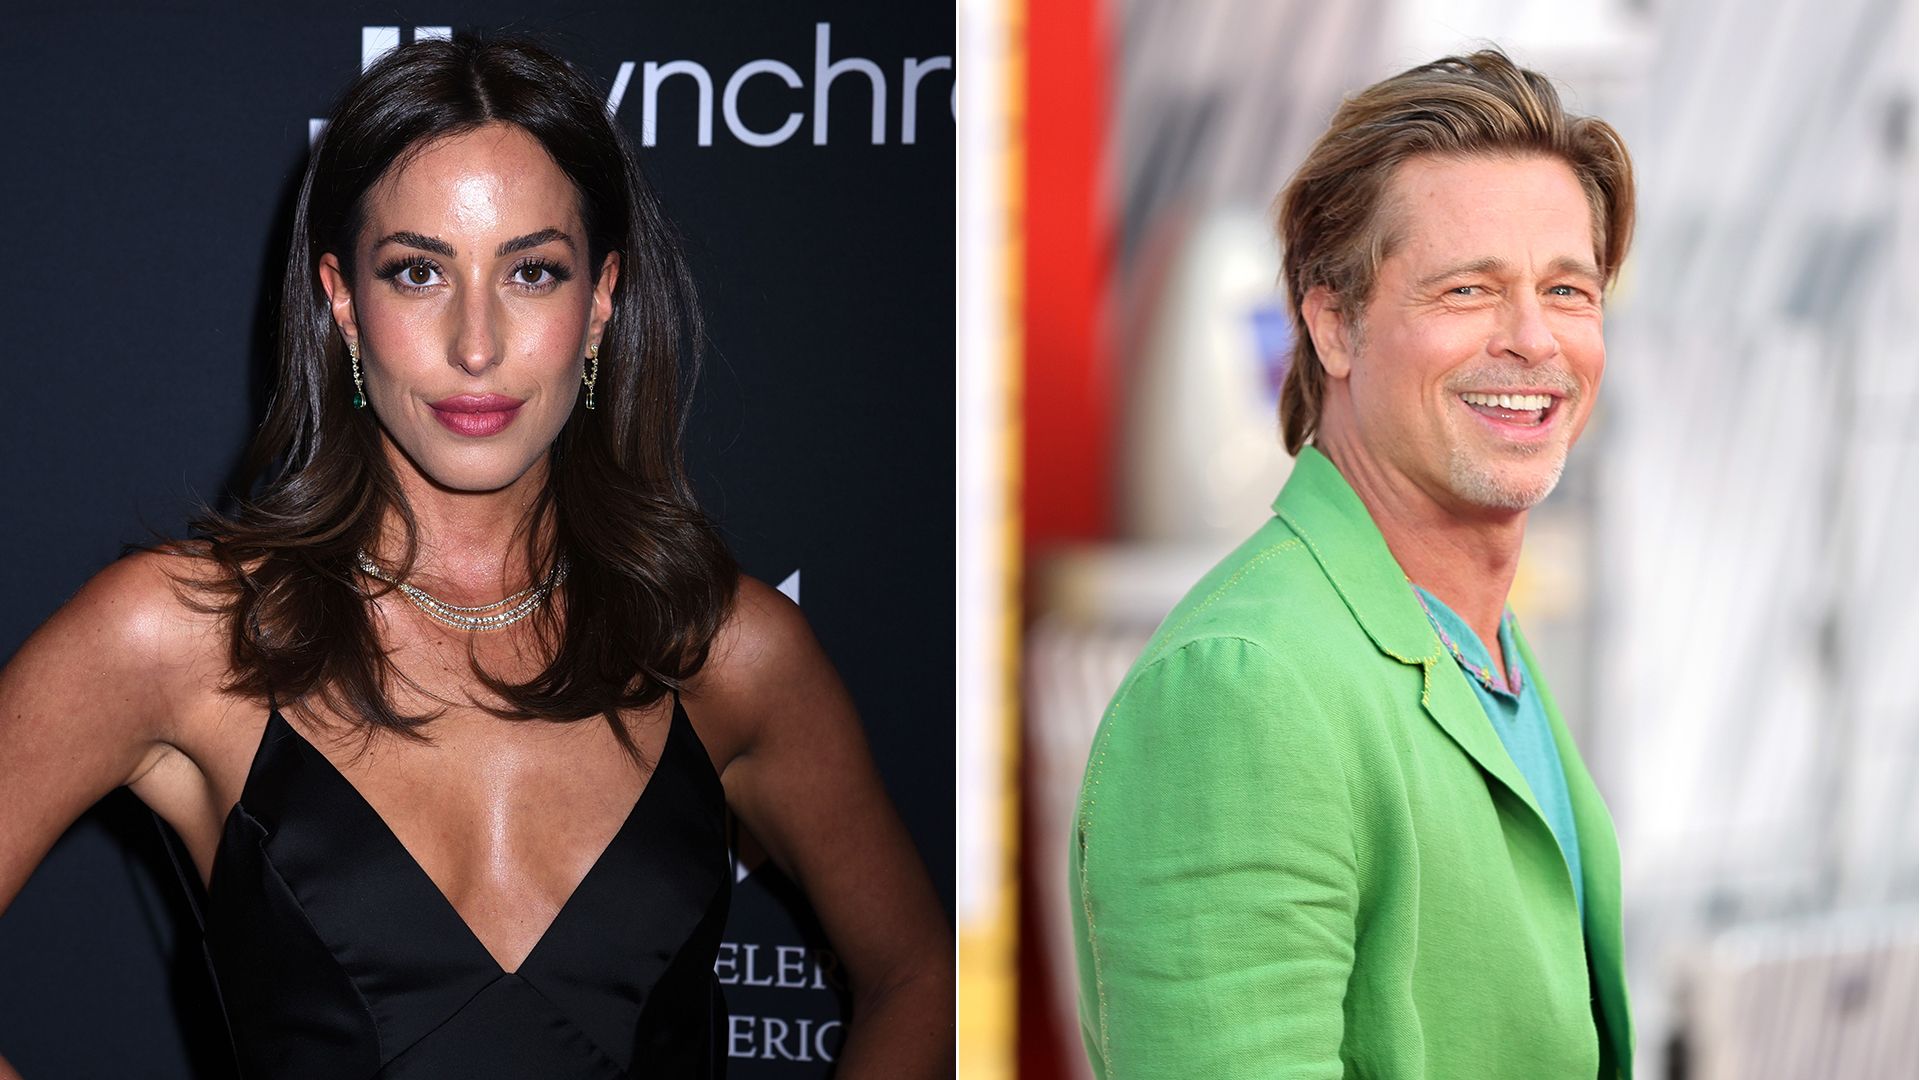 Is Brad Pitt's New Girlfriend Ines de Ramon Dating The Hollywood Star  Despite Not Finalizing Her Divorce With Estranged Husband Paul Wesley?  Sources Say A Final Legal Date Is Yet To Be